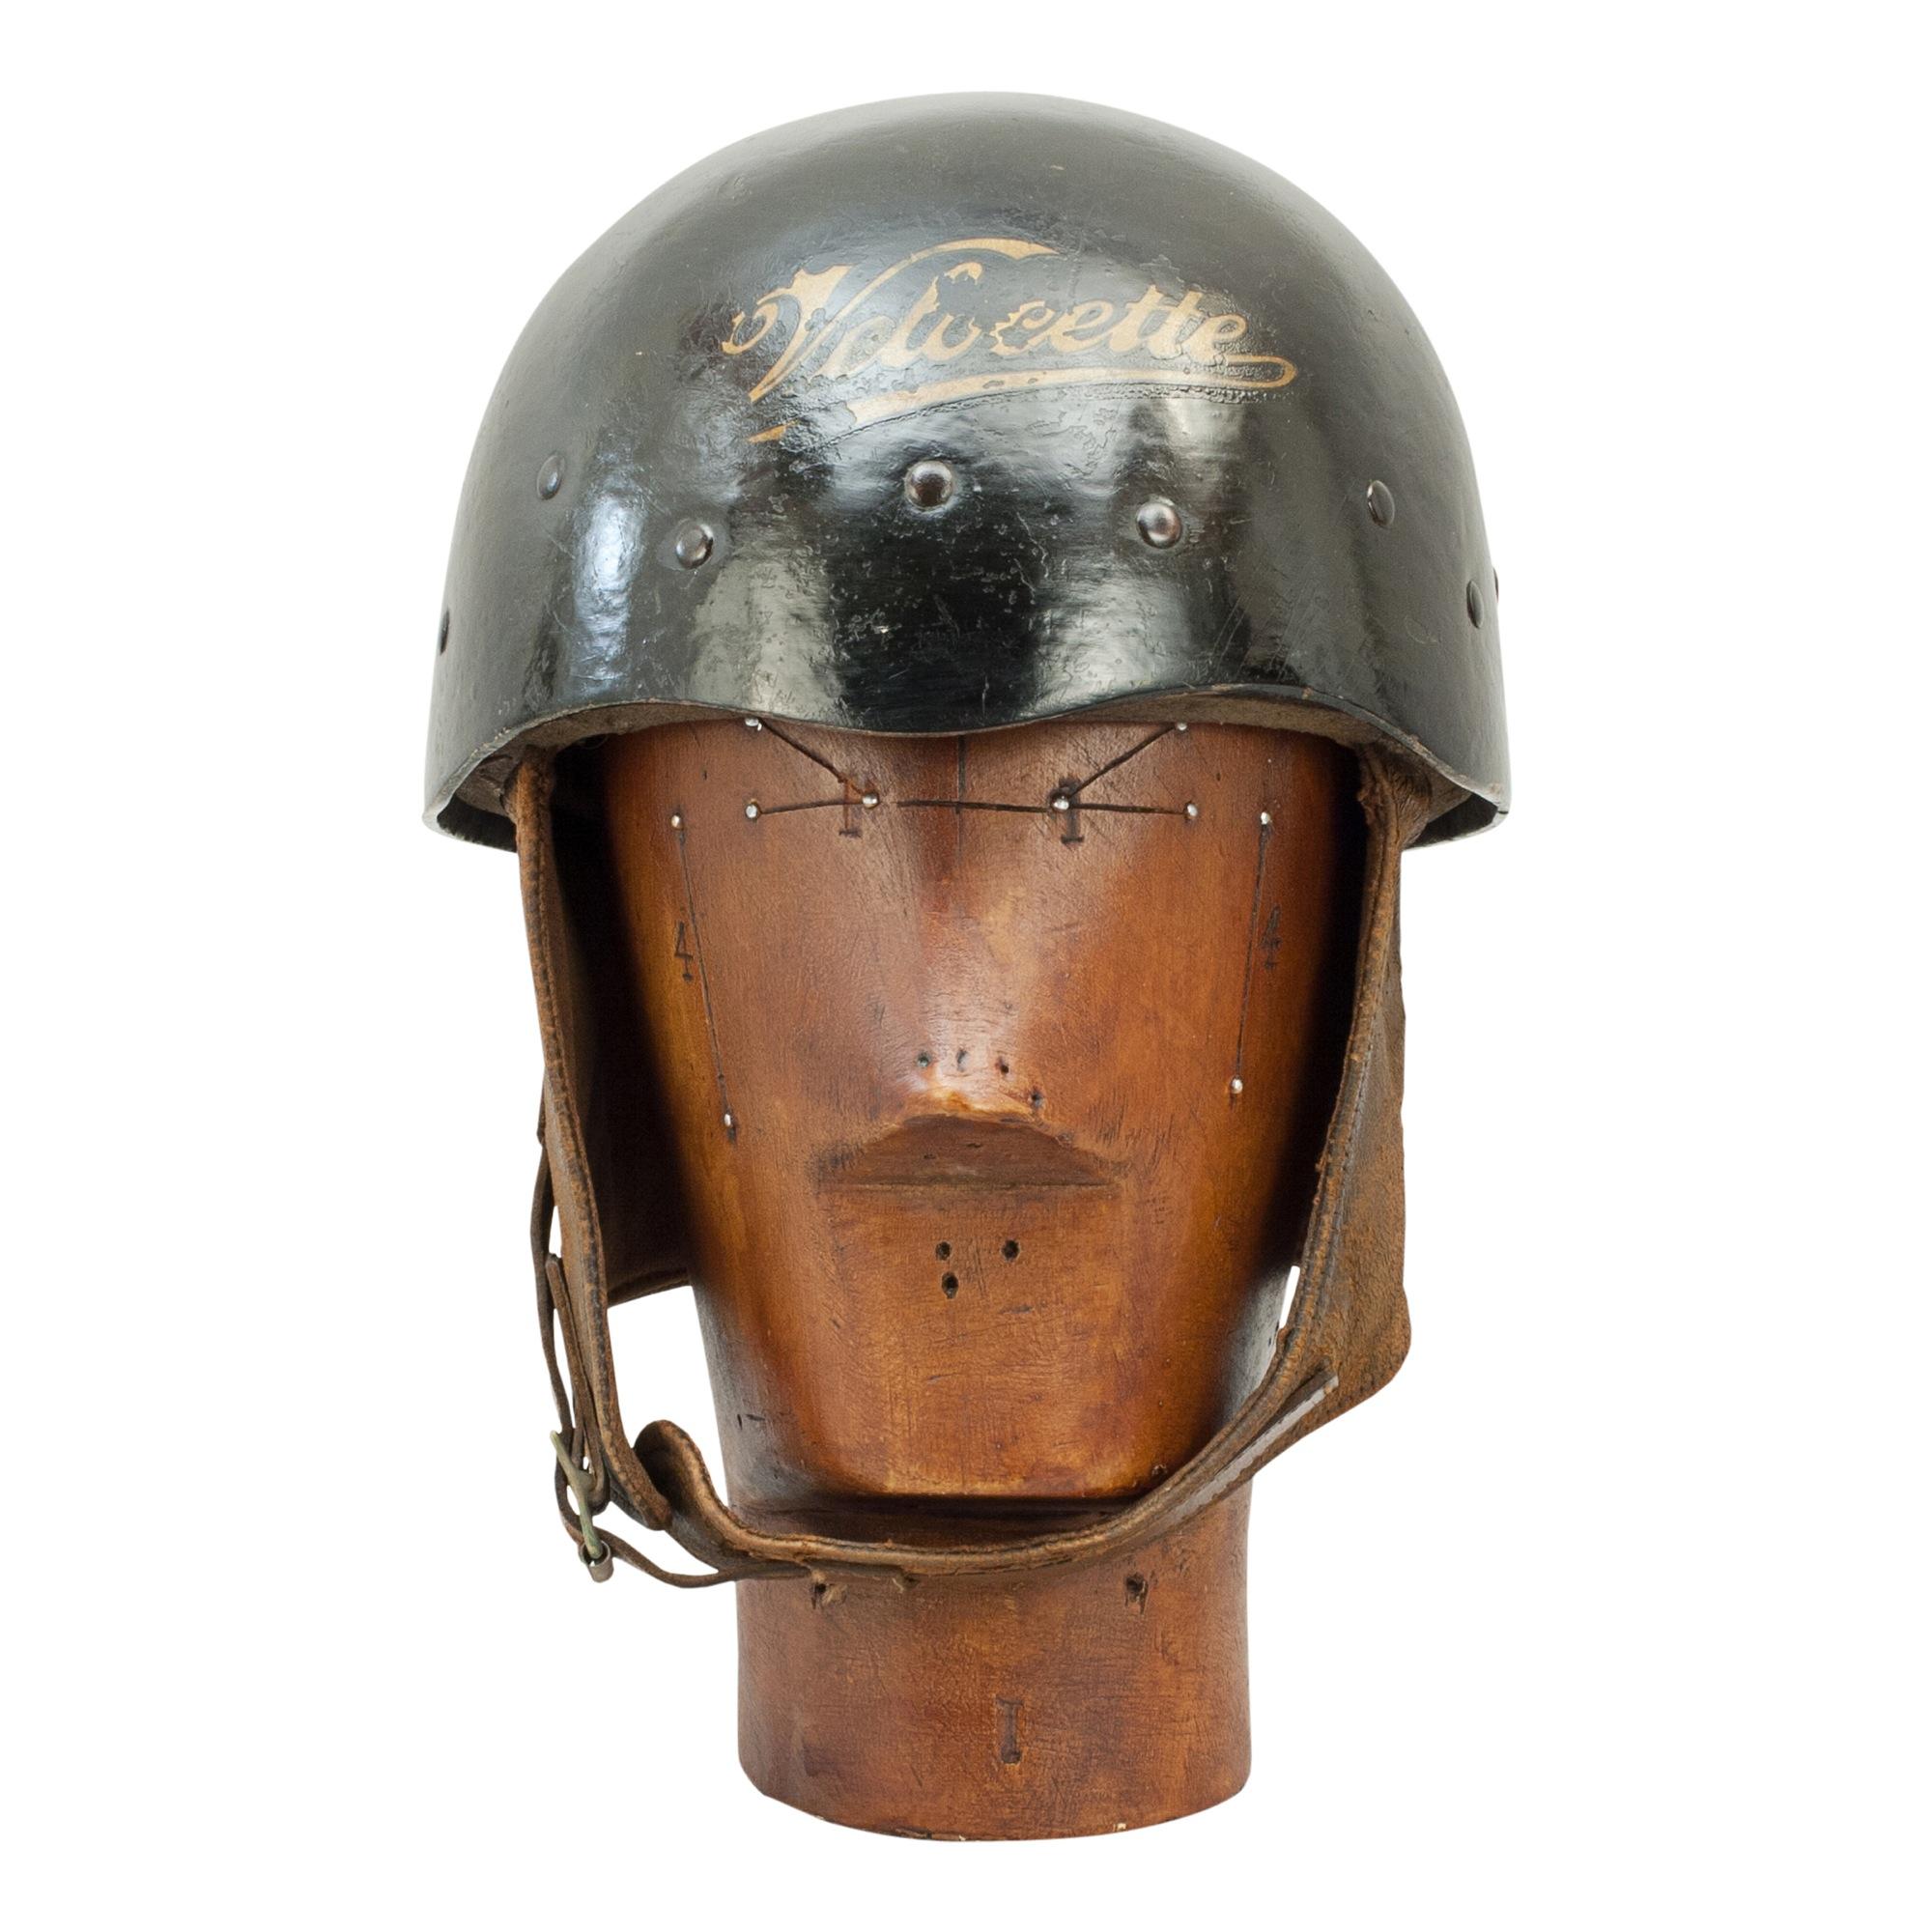 Vintage Velocette motorcycle crash helmet.

A 'Centurion' pudding basin style motorcycle helmet, The Patent Pulp model. The helmet is painted black with a Velocette transfer to front. This helmet fitted with a leather headband and webbing straps